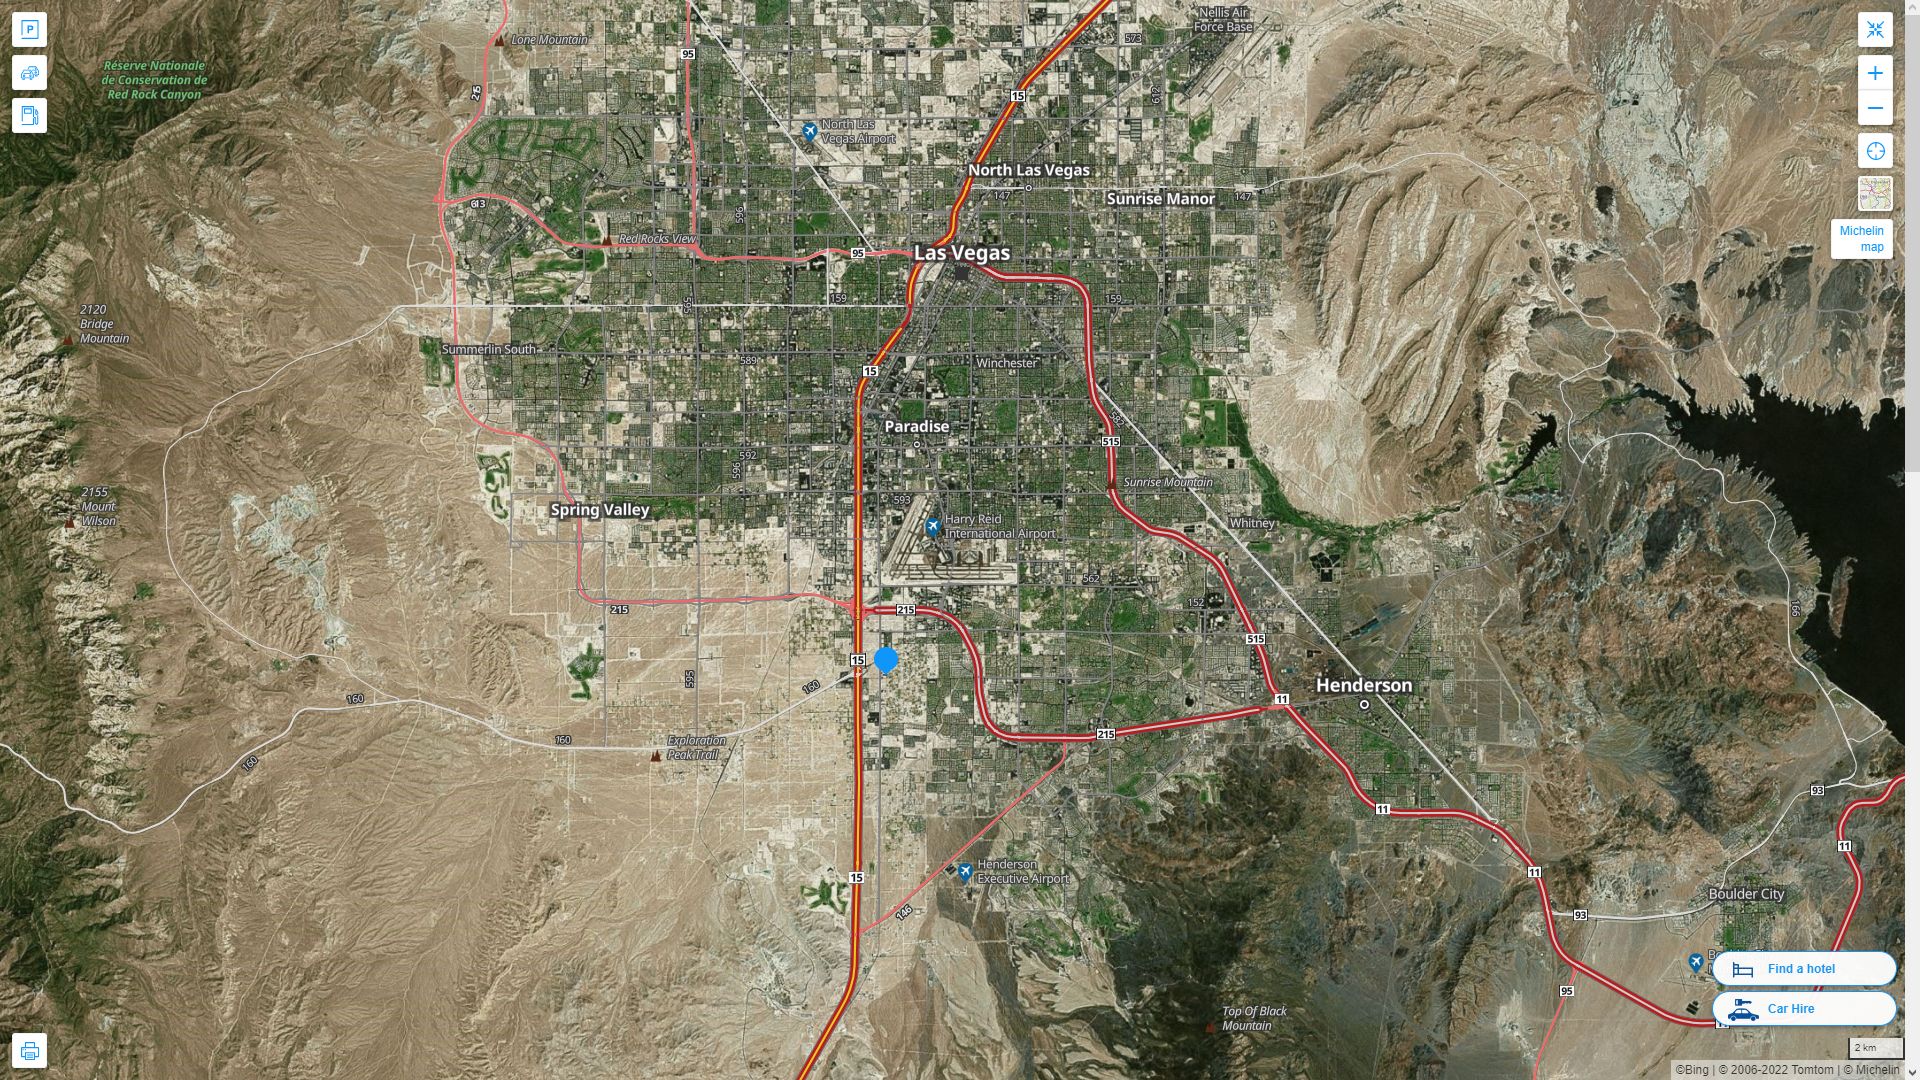 Enterprise Nevada Highway and Road Map with Satellite View